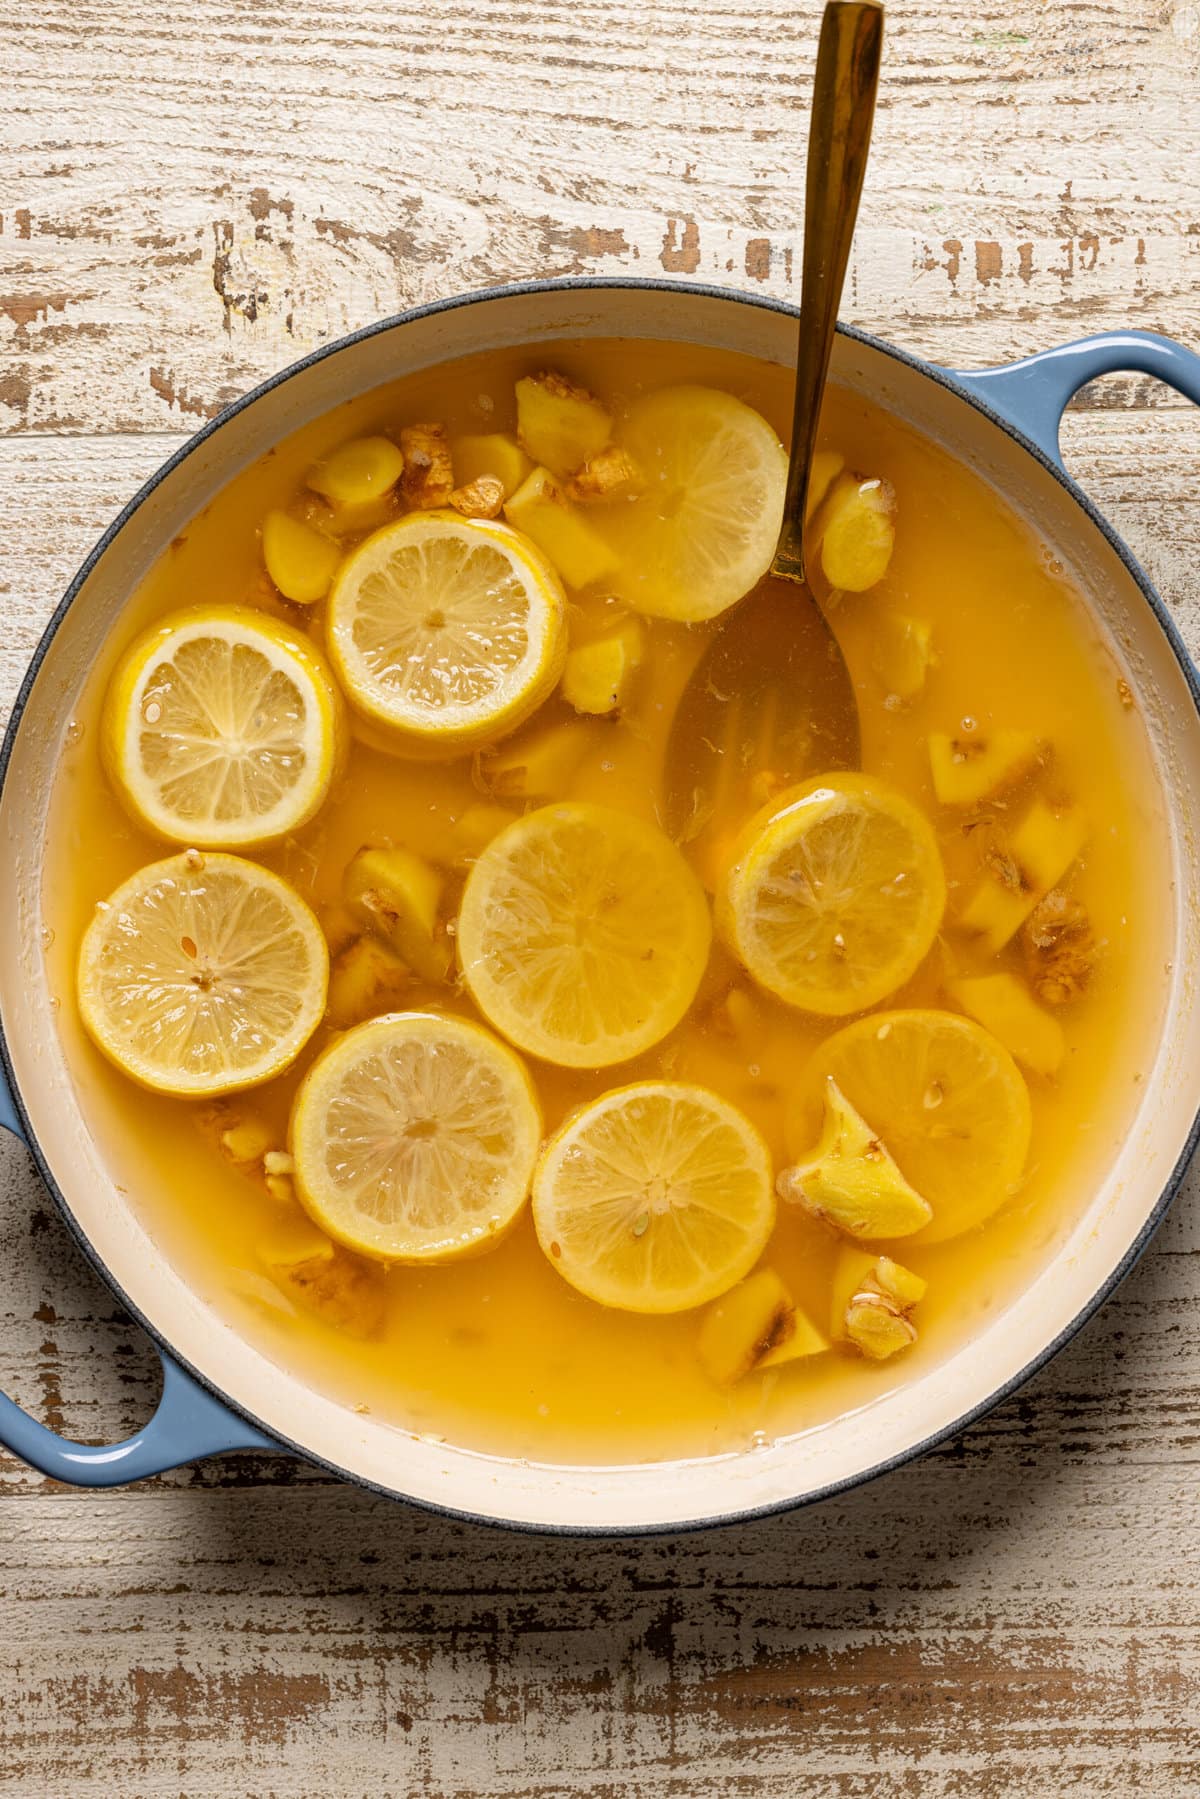 Lemon and ginger boiled in a large pot with water and spoon.